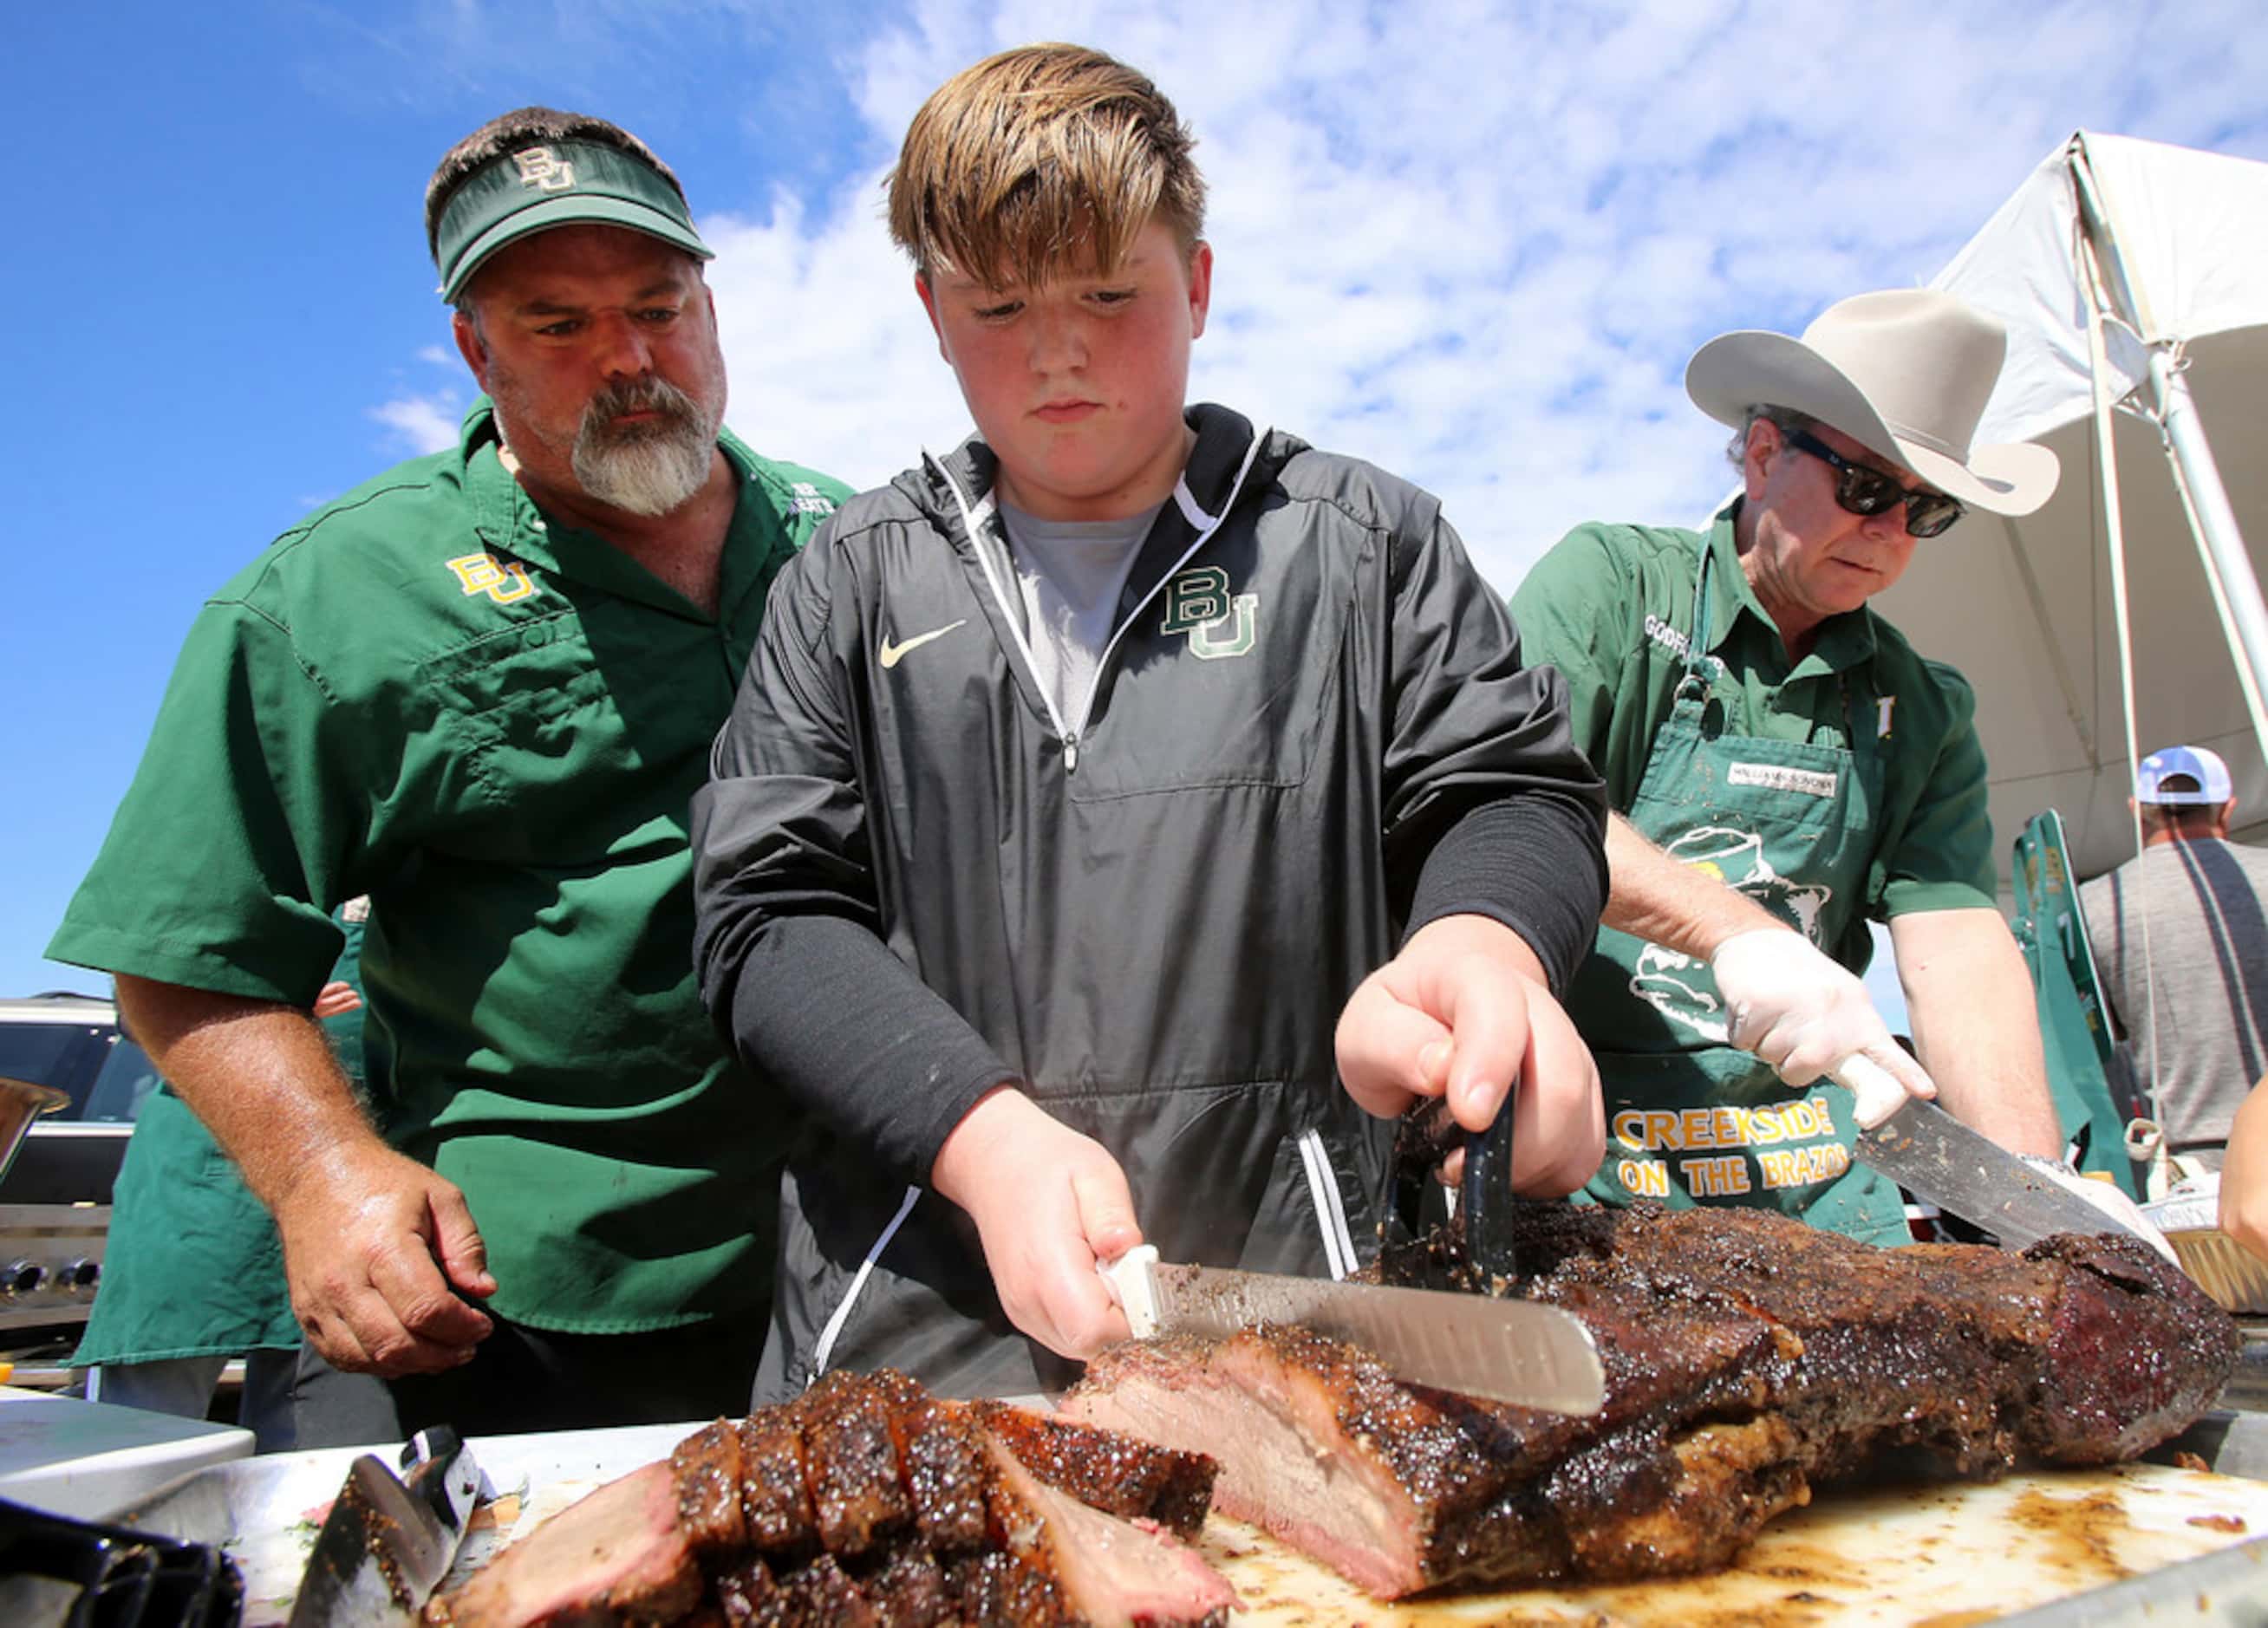 Luke Grant, 14, slices up brisket as his father Jonathan, left, looks on at their tailgate...